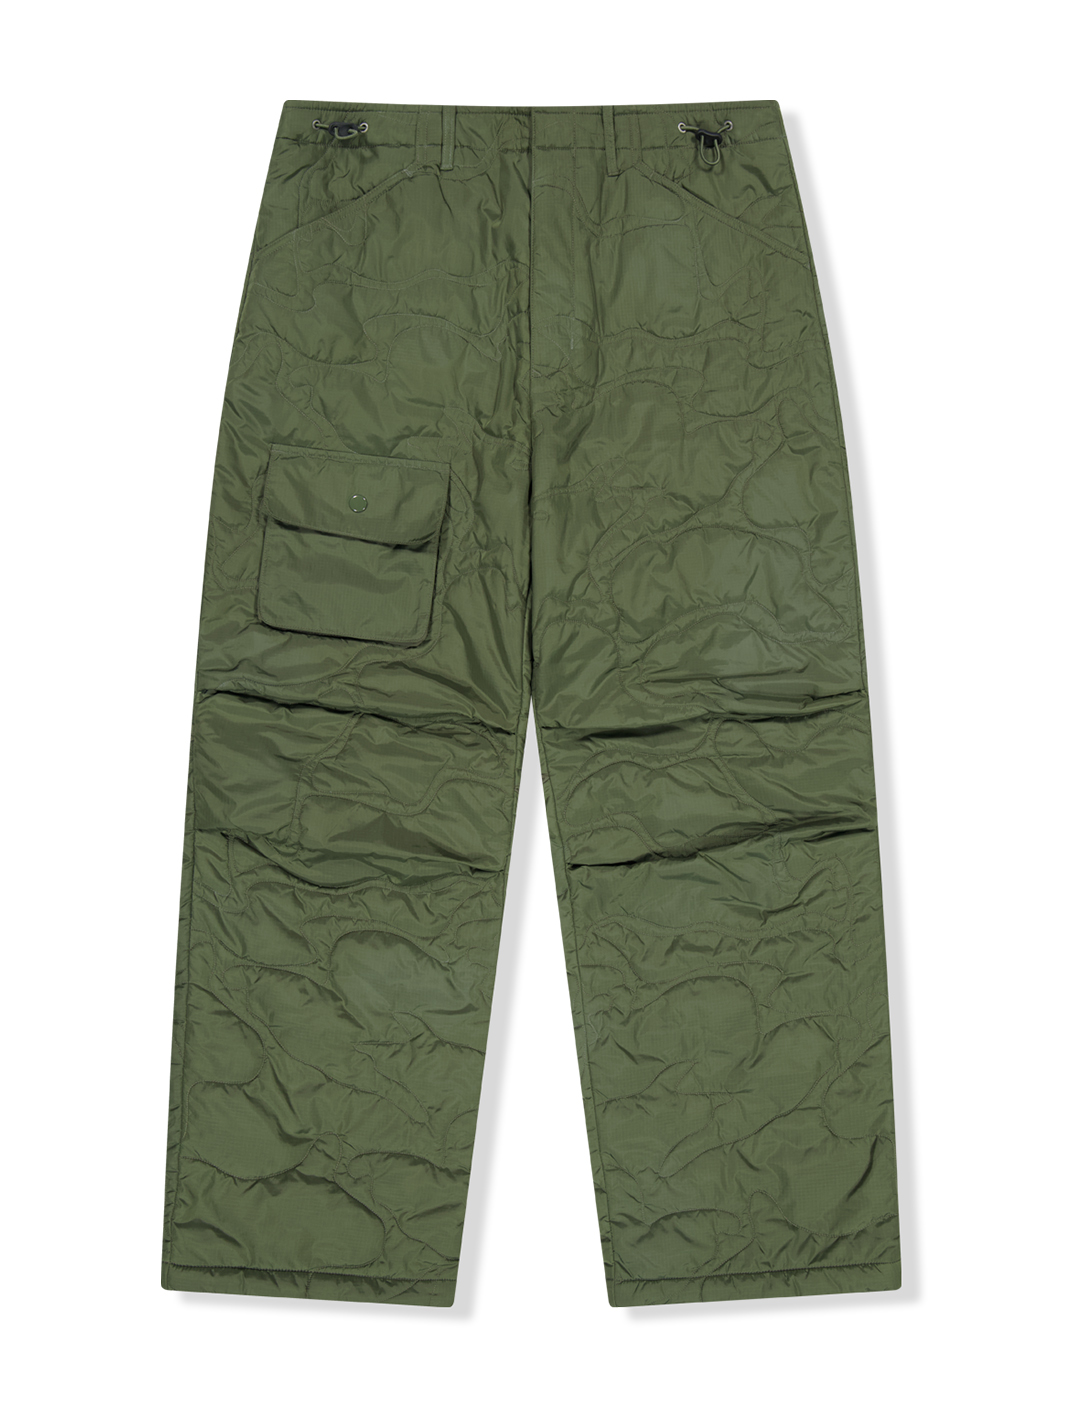 Quilted Camo Liner Pants Khaki